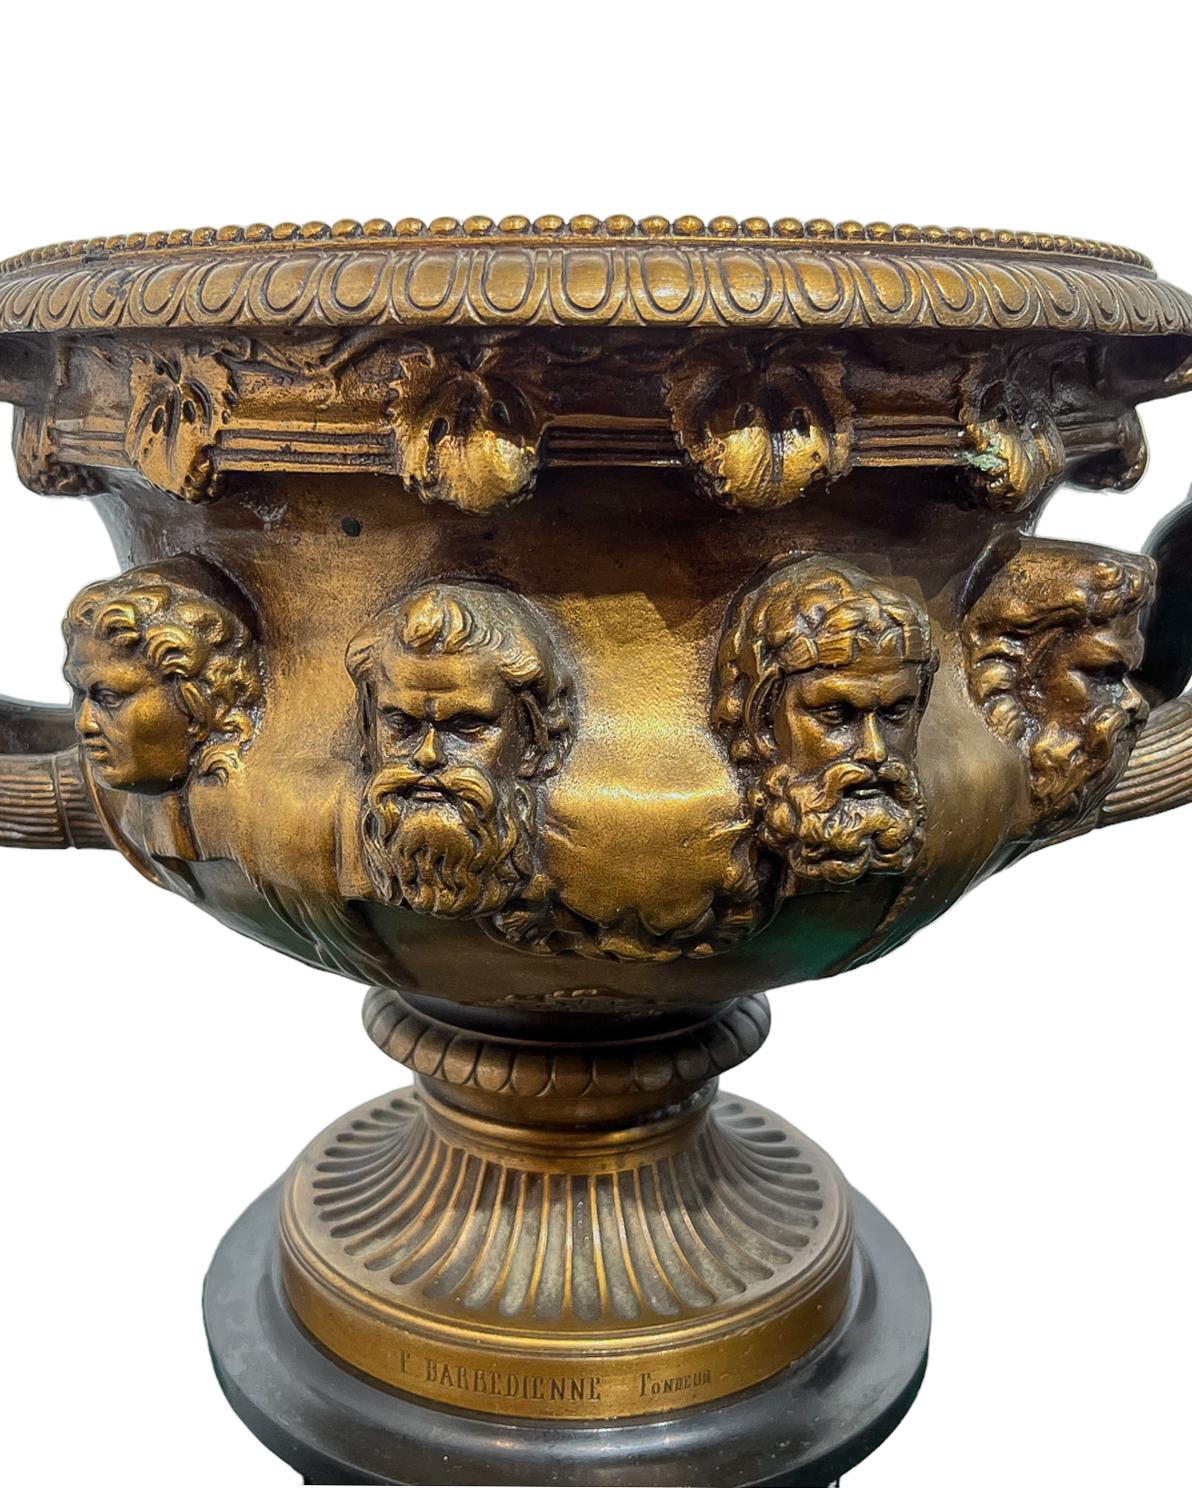 A patinated bronze model of the Warwick vase with Bacchic ornament by the Barbedienne foundry. Modeled after the celebrated ancient Roman marble vase, discovered in fragments in 1771 in the ruins of Hardian's villa near Tivoli by the Scottish artist